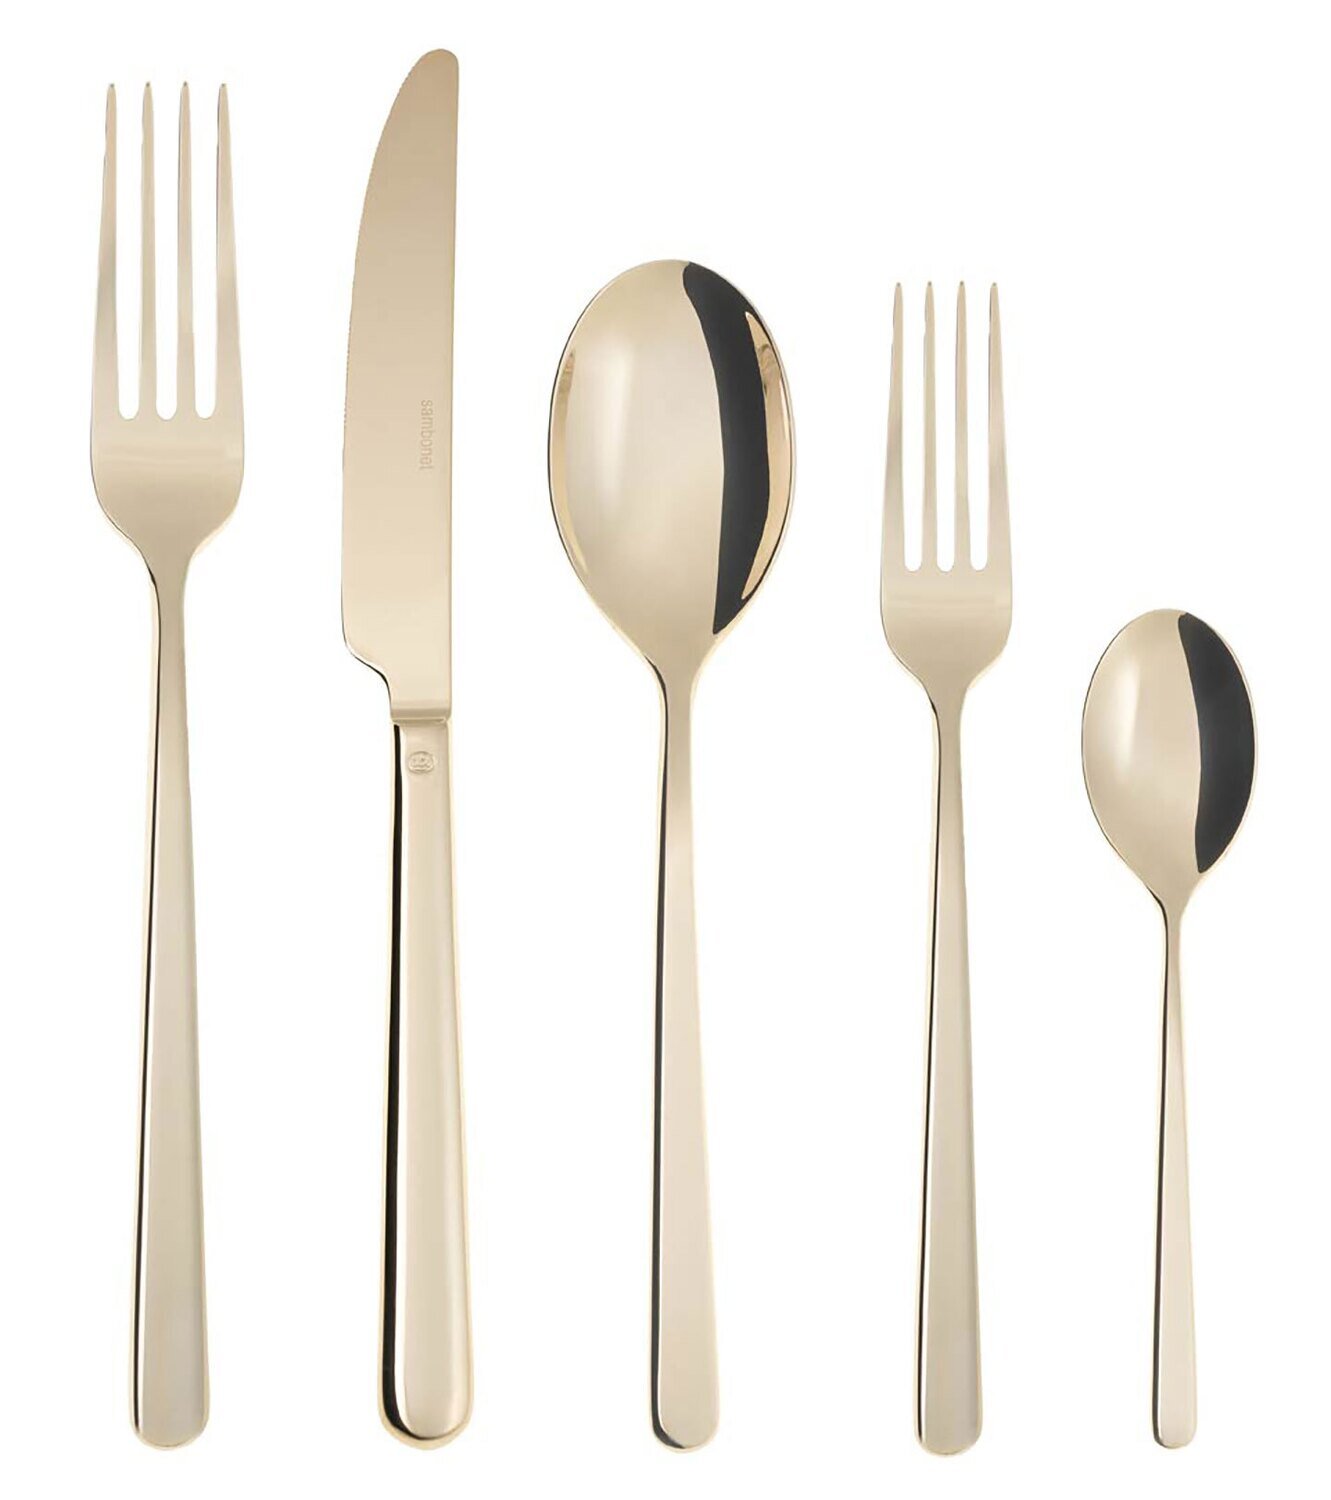 Sambonet Linear PVD Champagne 5 Piece Place Setting S.H. 52713P93